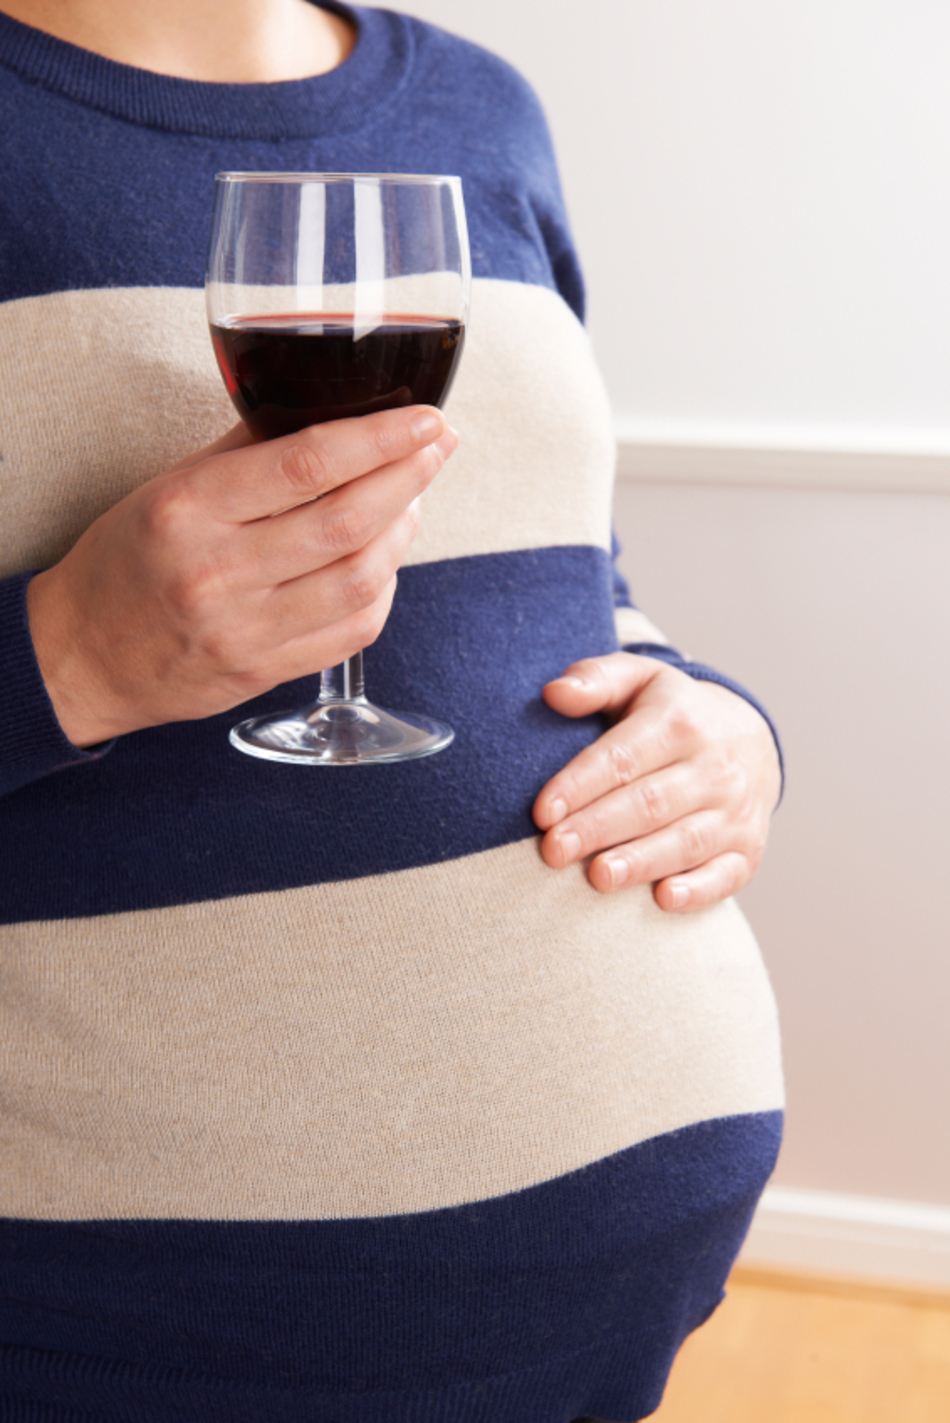 Putting Your Fetus at Risk: Drinking Alcohol During Pregnancy